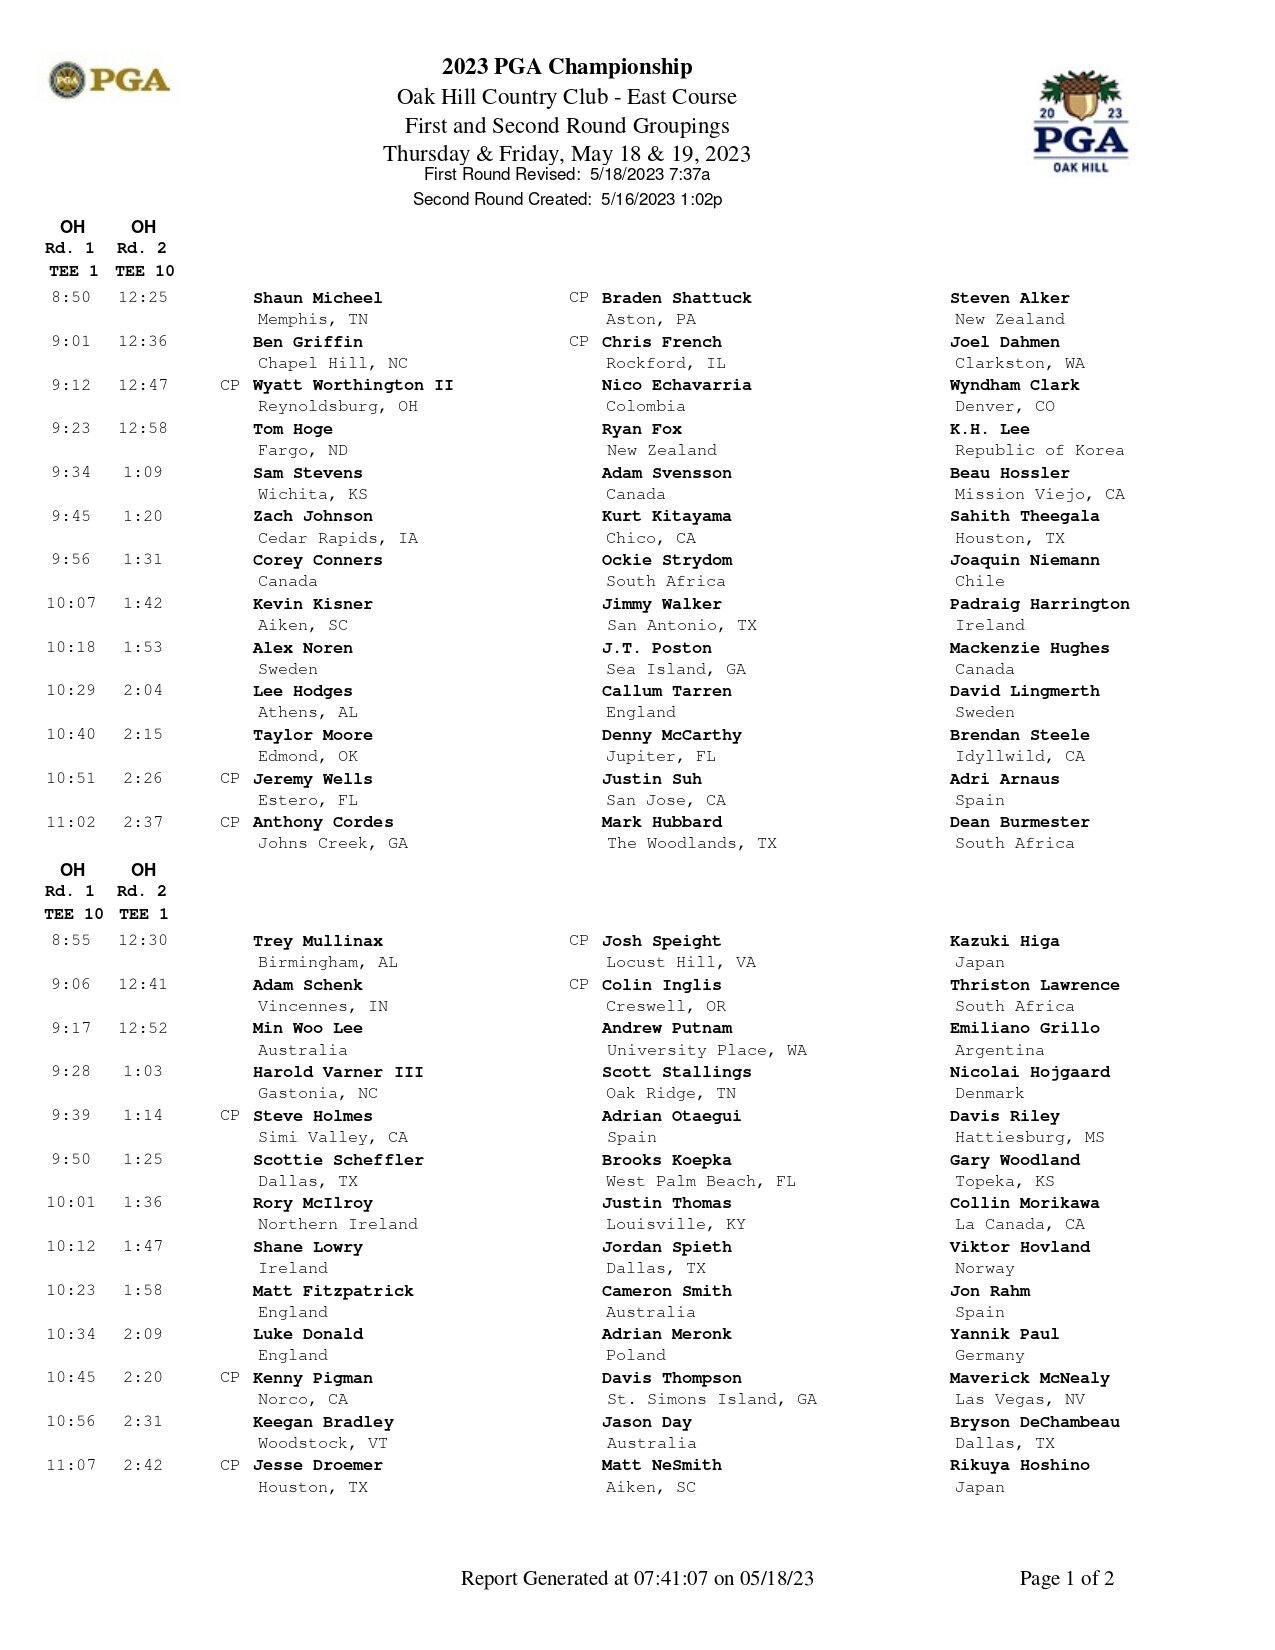 Schedules and full groups for day 1 and 2 of the pga championship